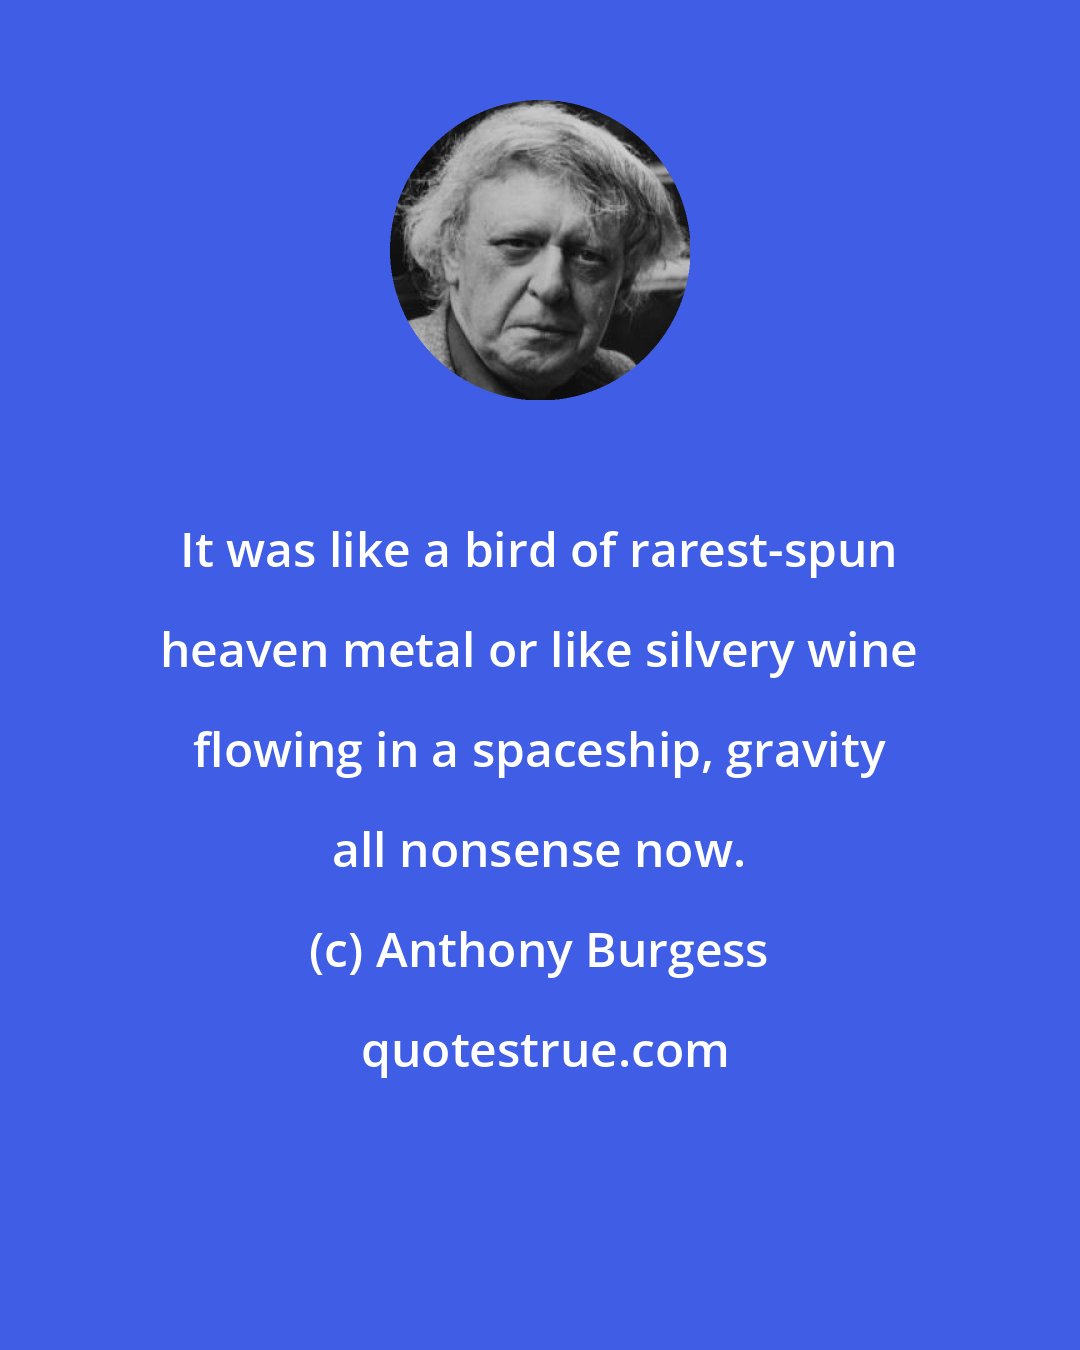 Anthony Burgess: It was like a bird of rarest-spun heaven metal or like silvery wine flowing in a spaceship, gravity all nonsense now.